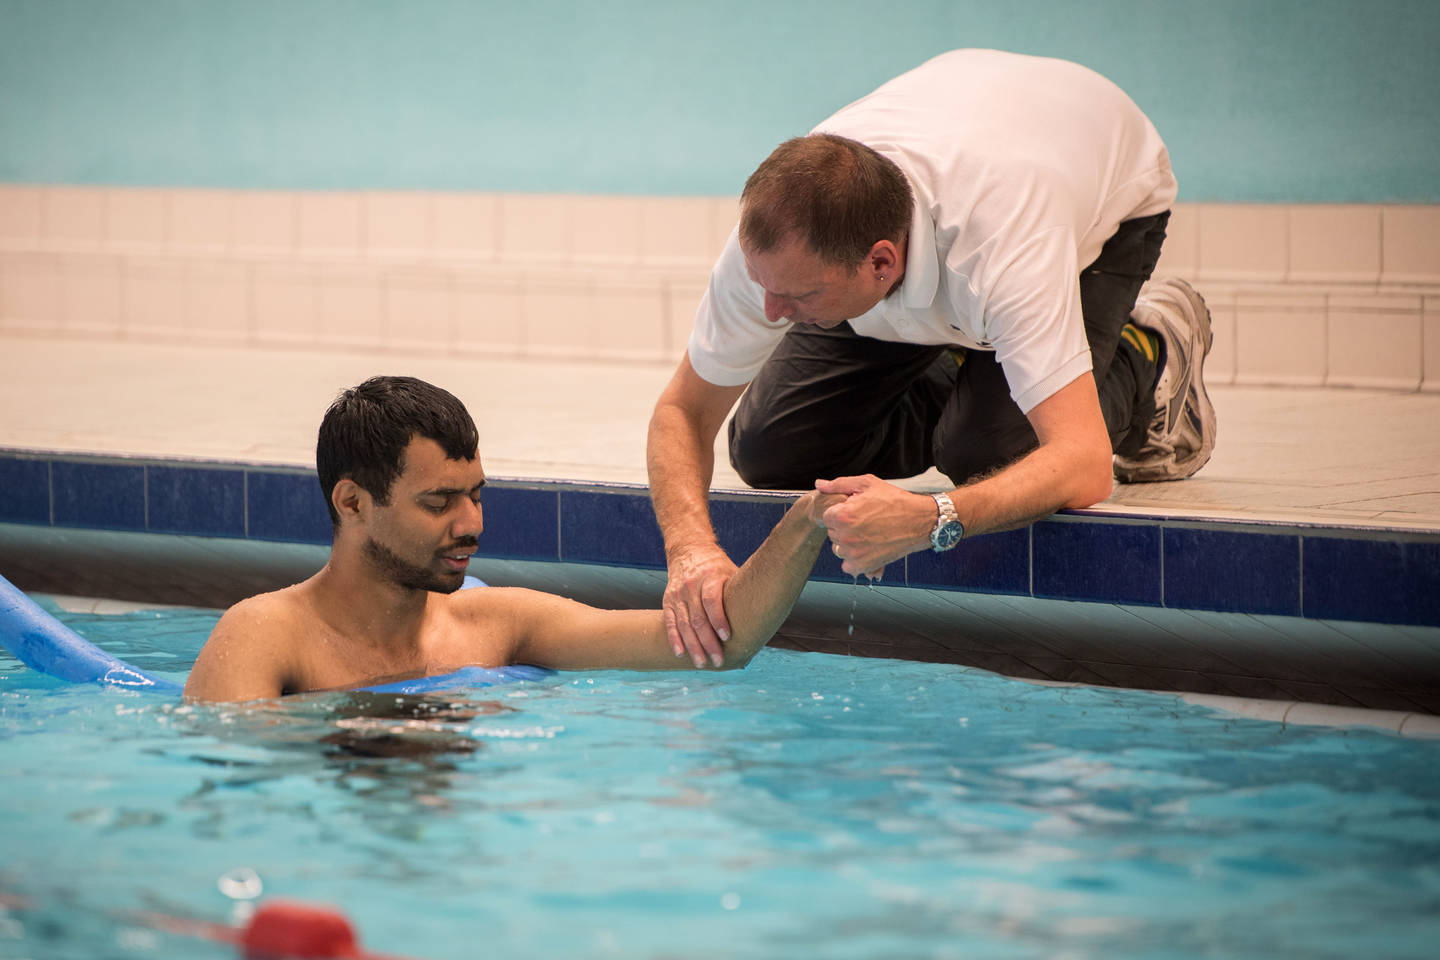 Swimming teacher supporting visually impaired man in swimming pool